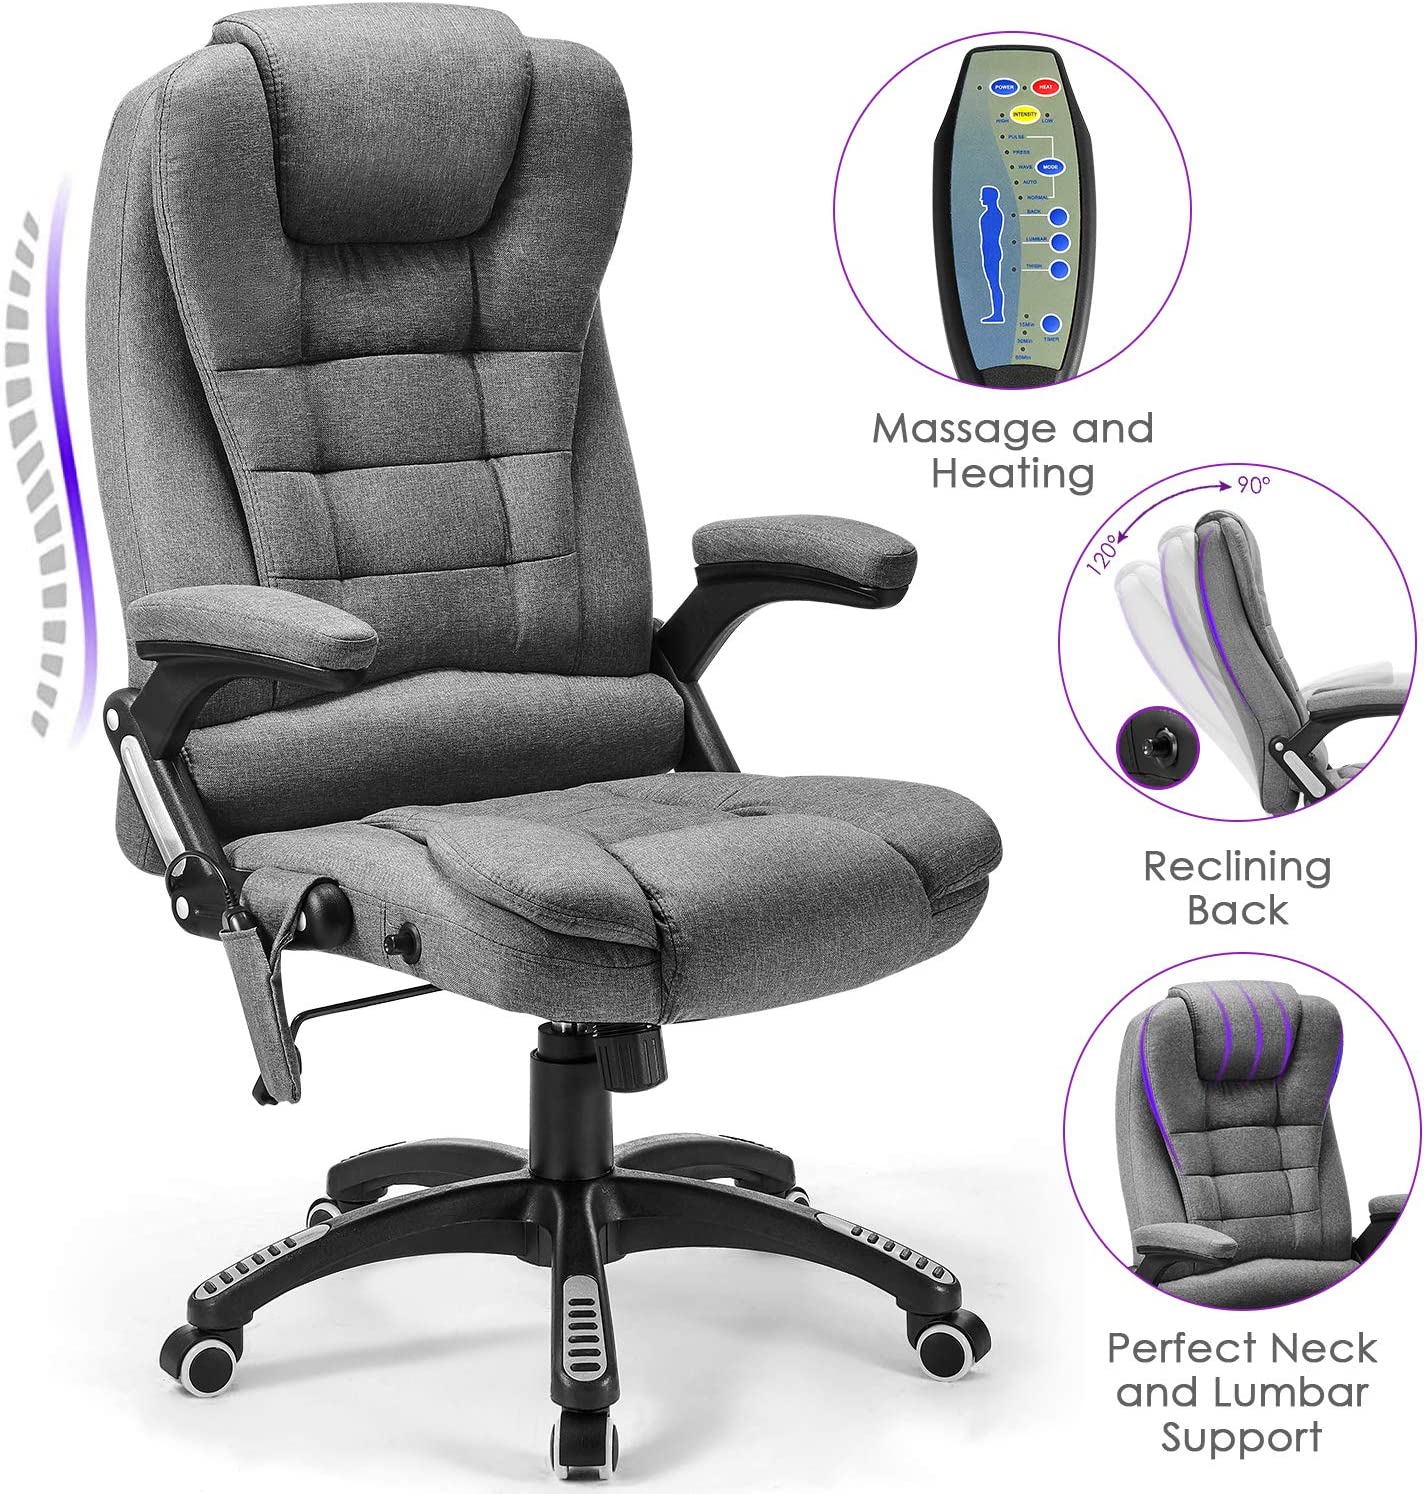 Best Office Chair Massager Guide To Getting The Best Heated Massage